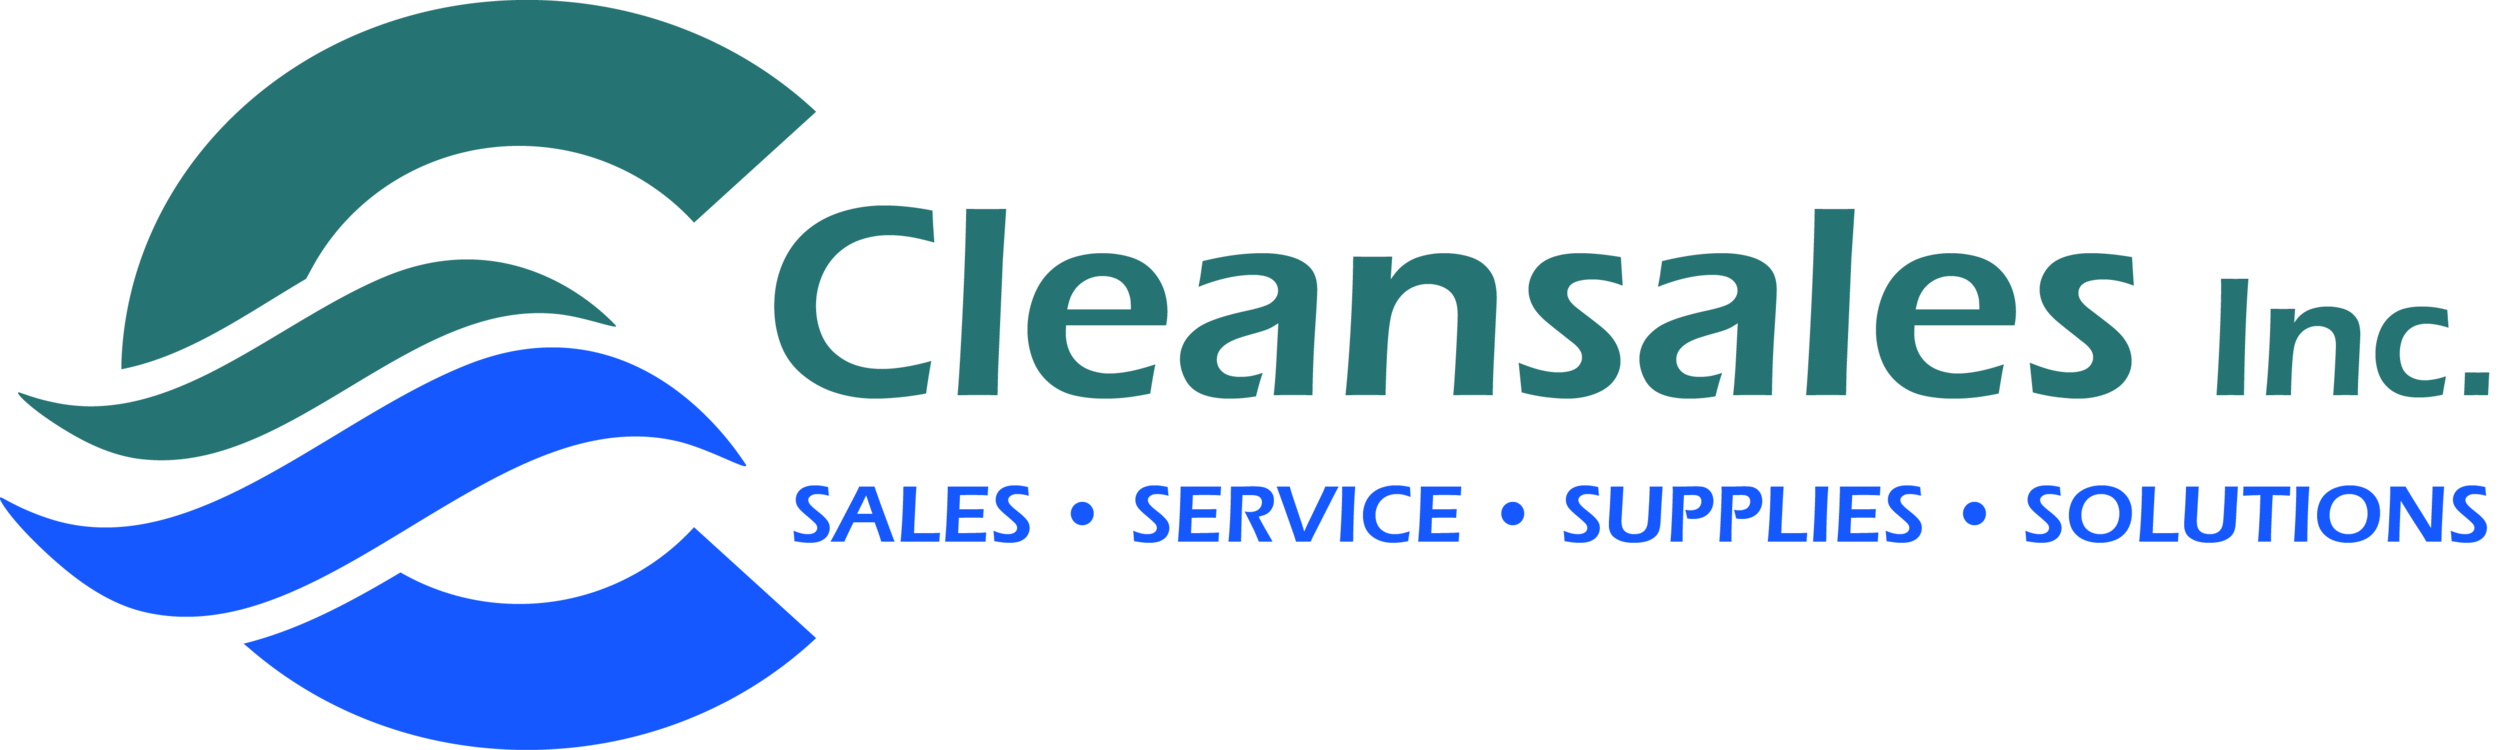 Cleansales Inc. - Cleaning, Sanitation &amp; Disinfectant Supplies